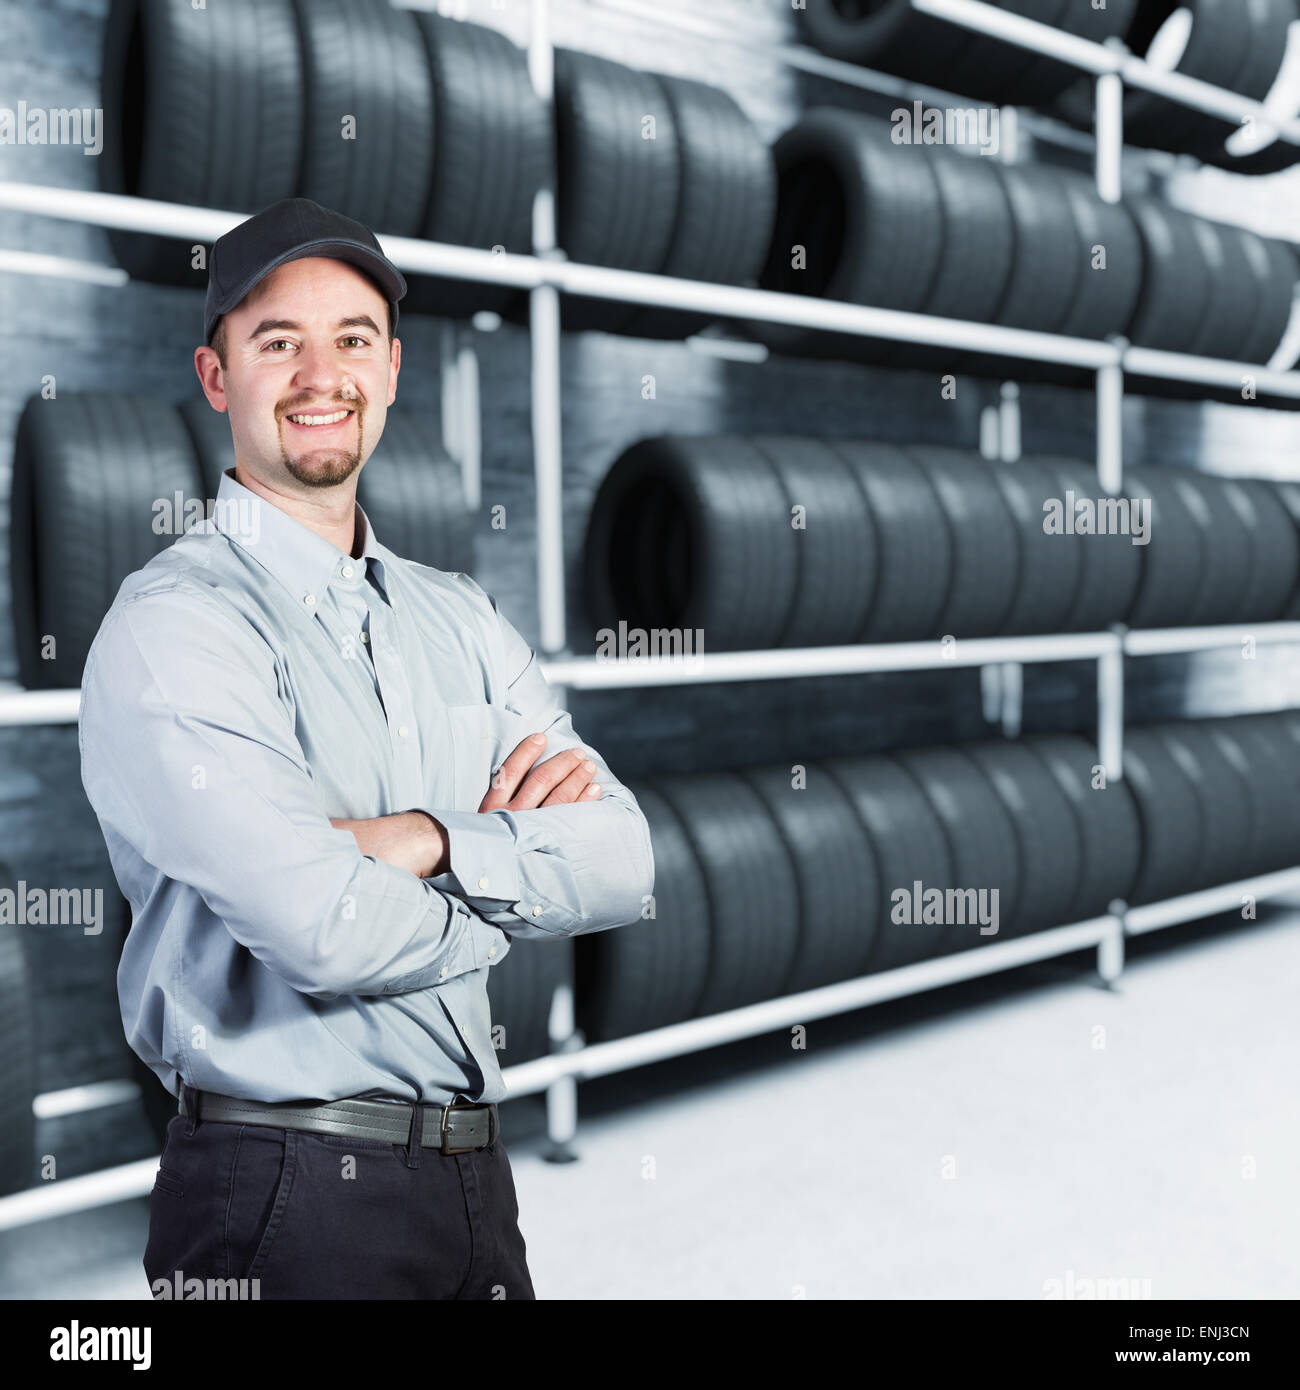 smiling garage man and tires background Stock Photo